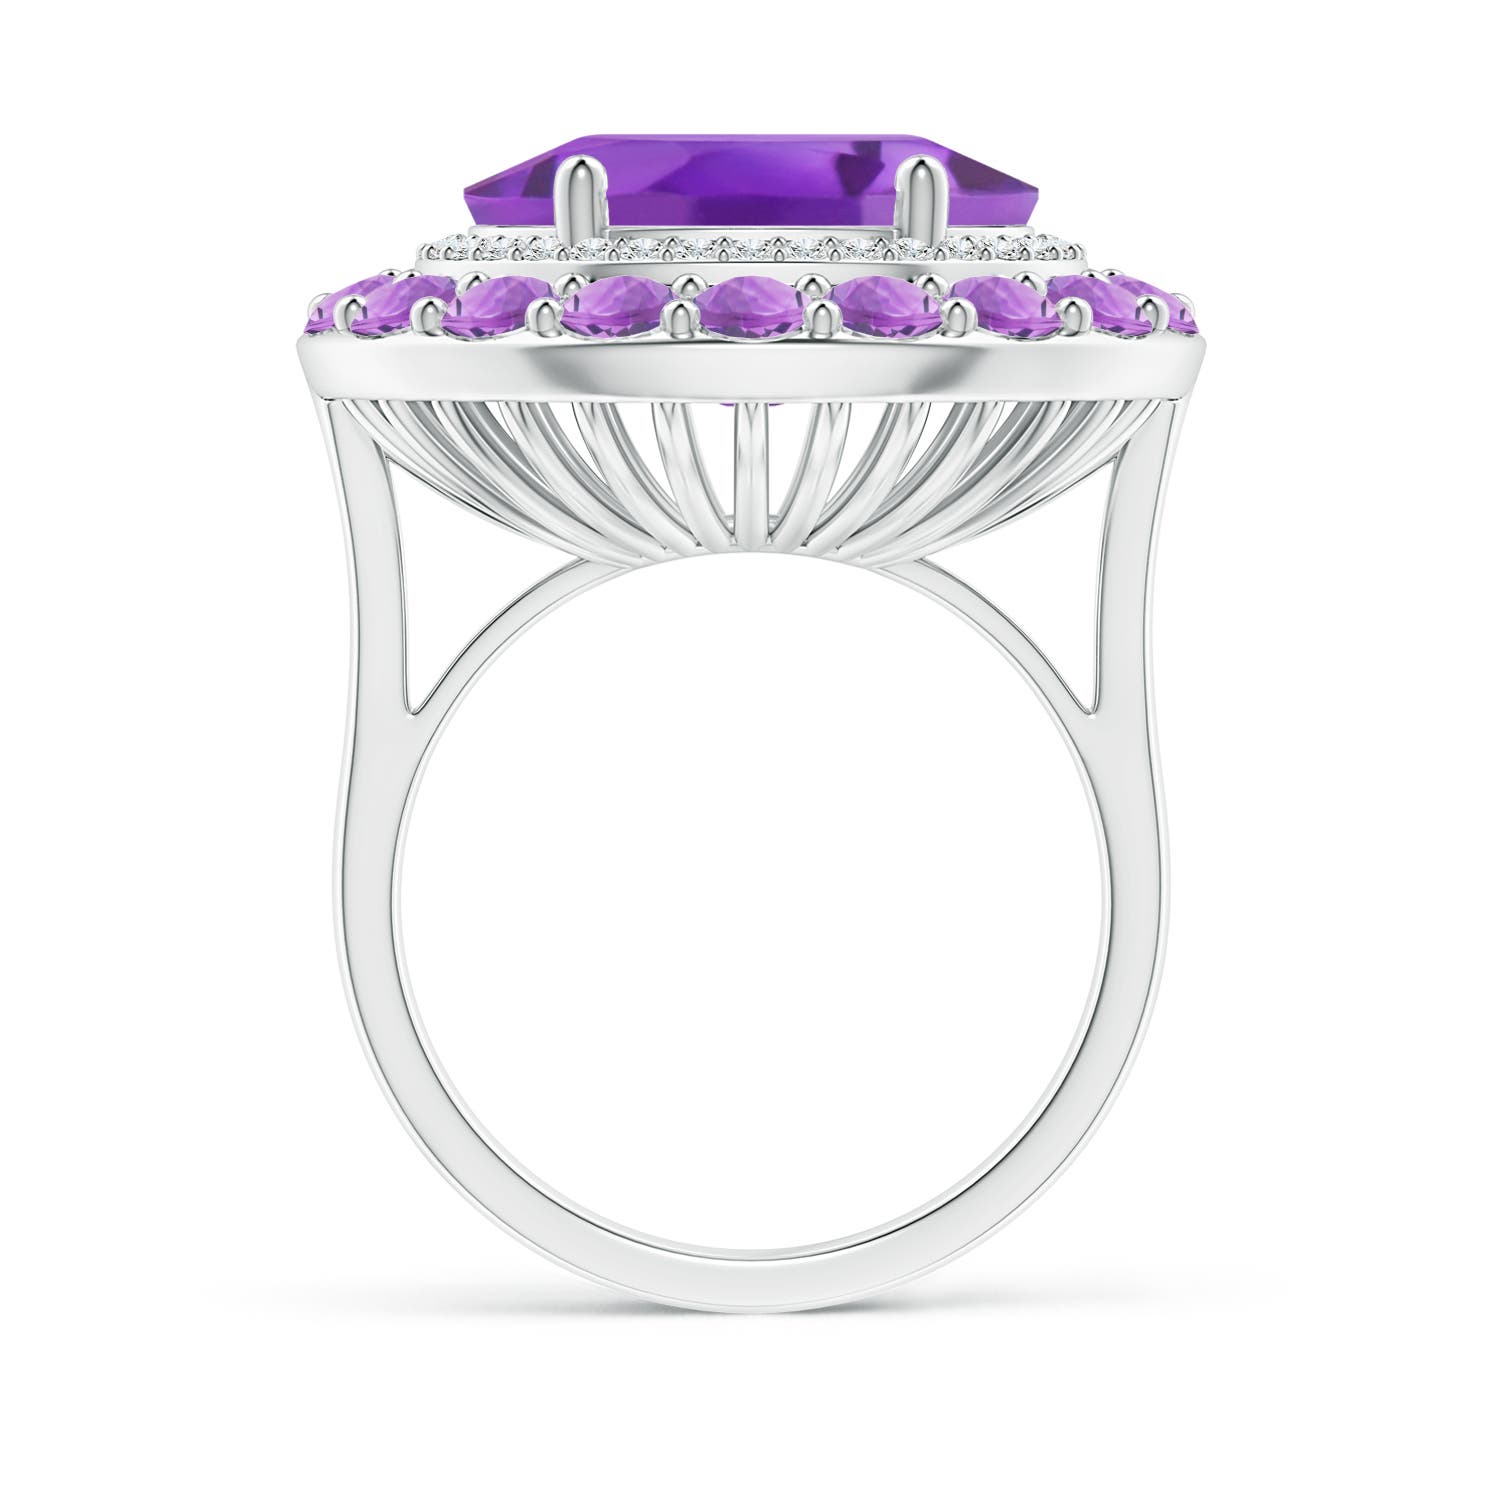 AA - Amethyst / 8.52 CT / 14 KT White Gold